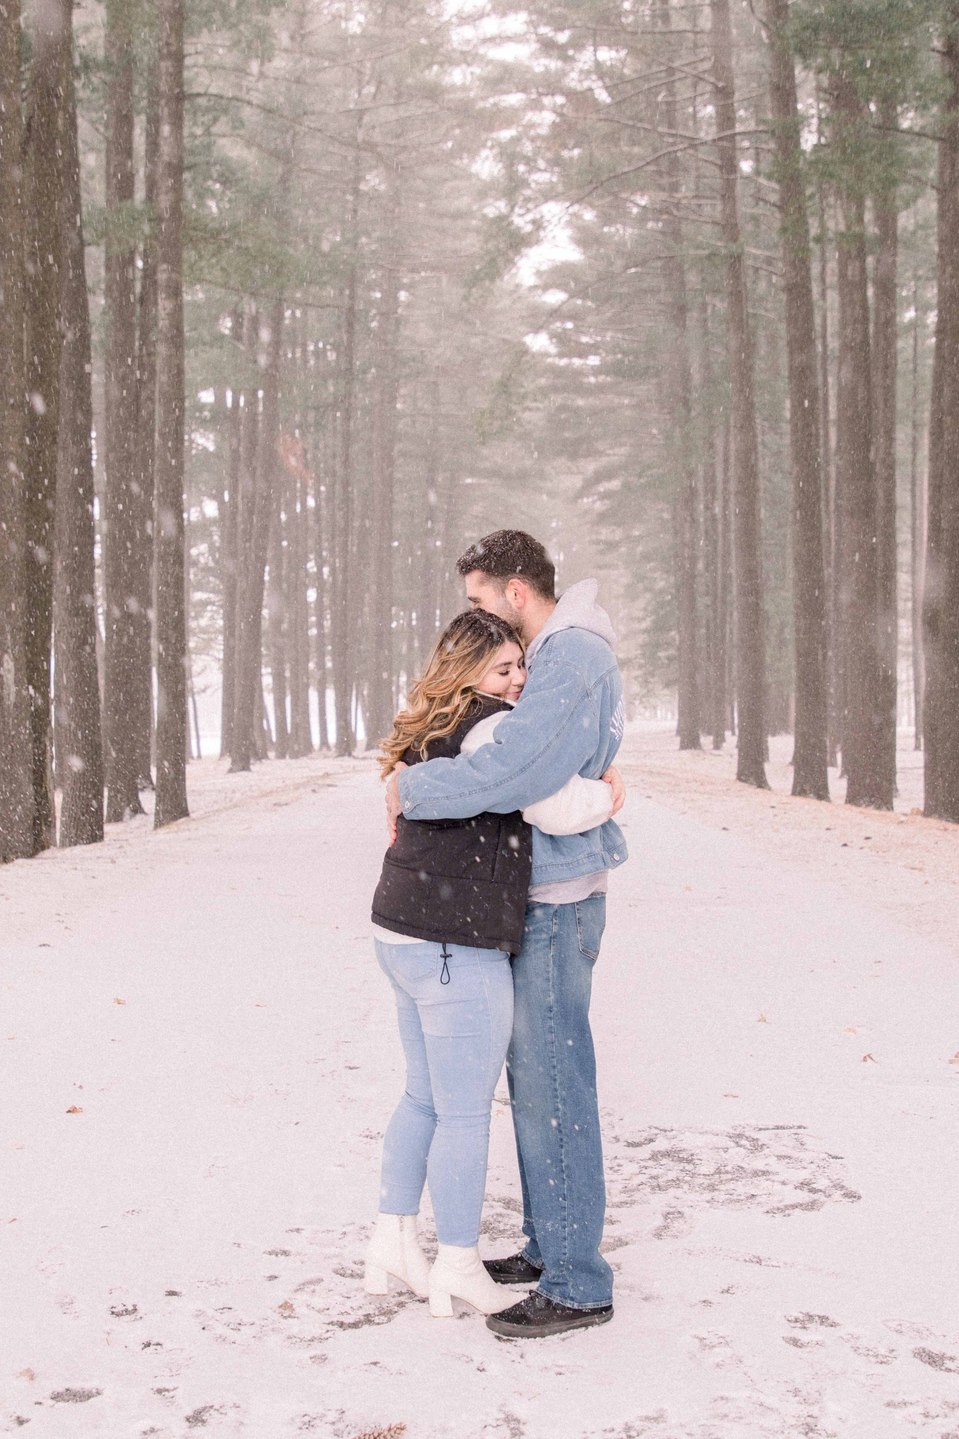 Portrait of young couple hugging each other on a winter trail, Niagara family photographer, family photography, Niagara portrait photographer, portrait photography, Champlain photographer, Hawkesbury photographer, Emily VanderBeek Photography.